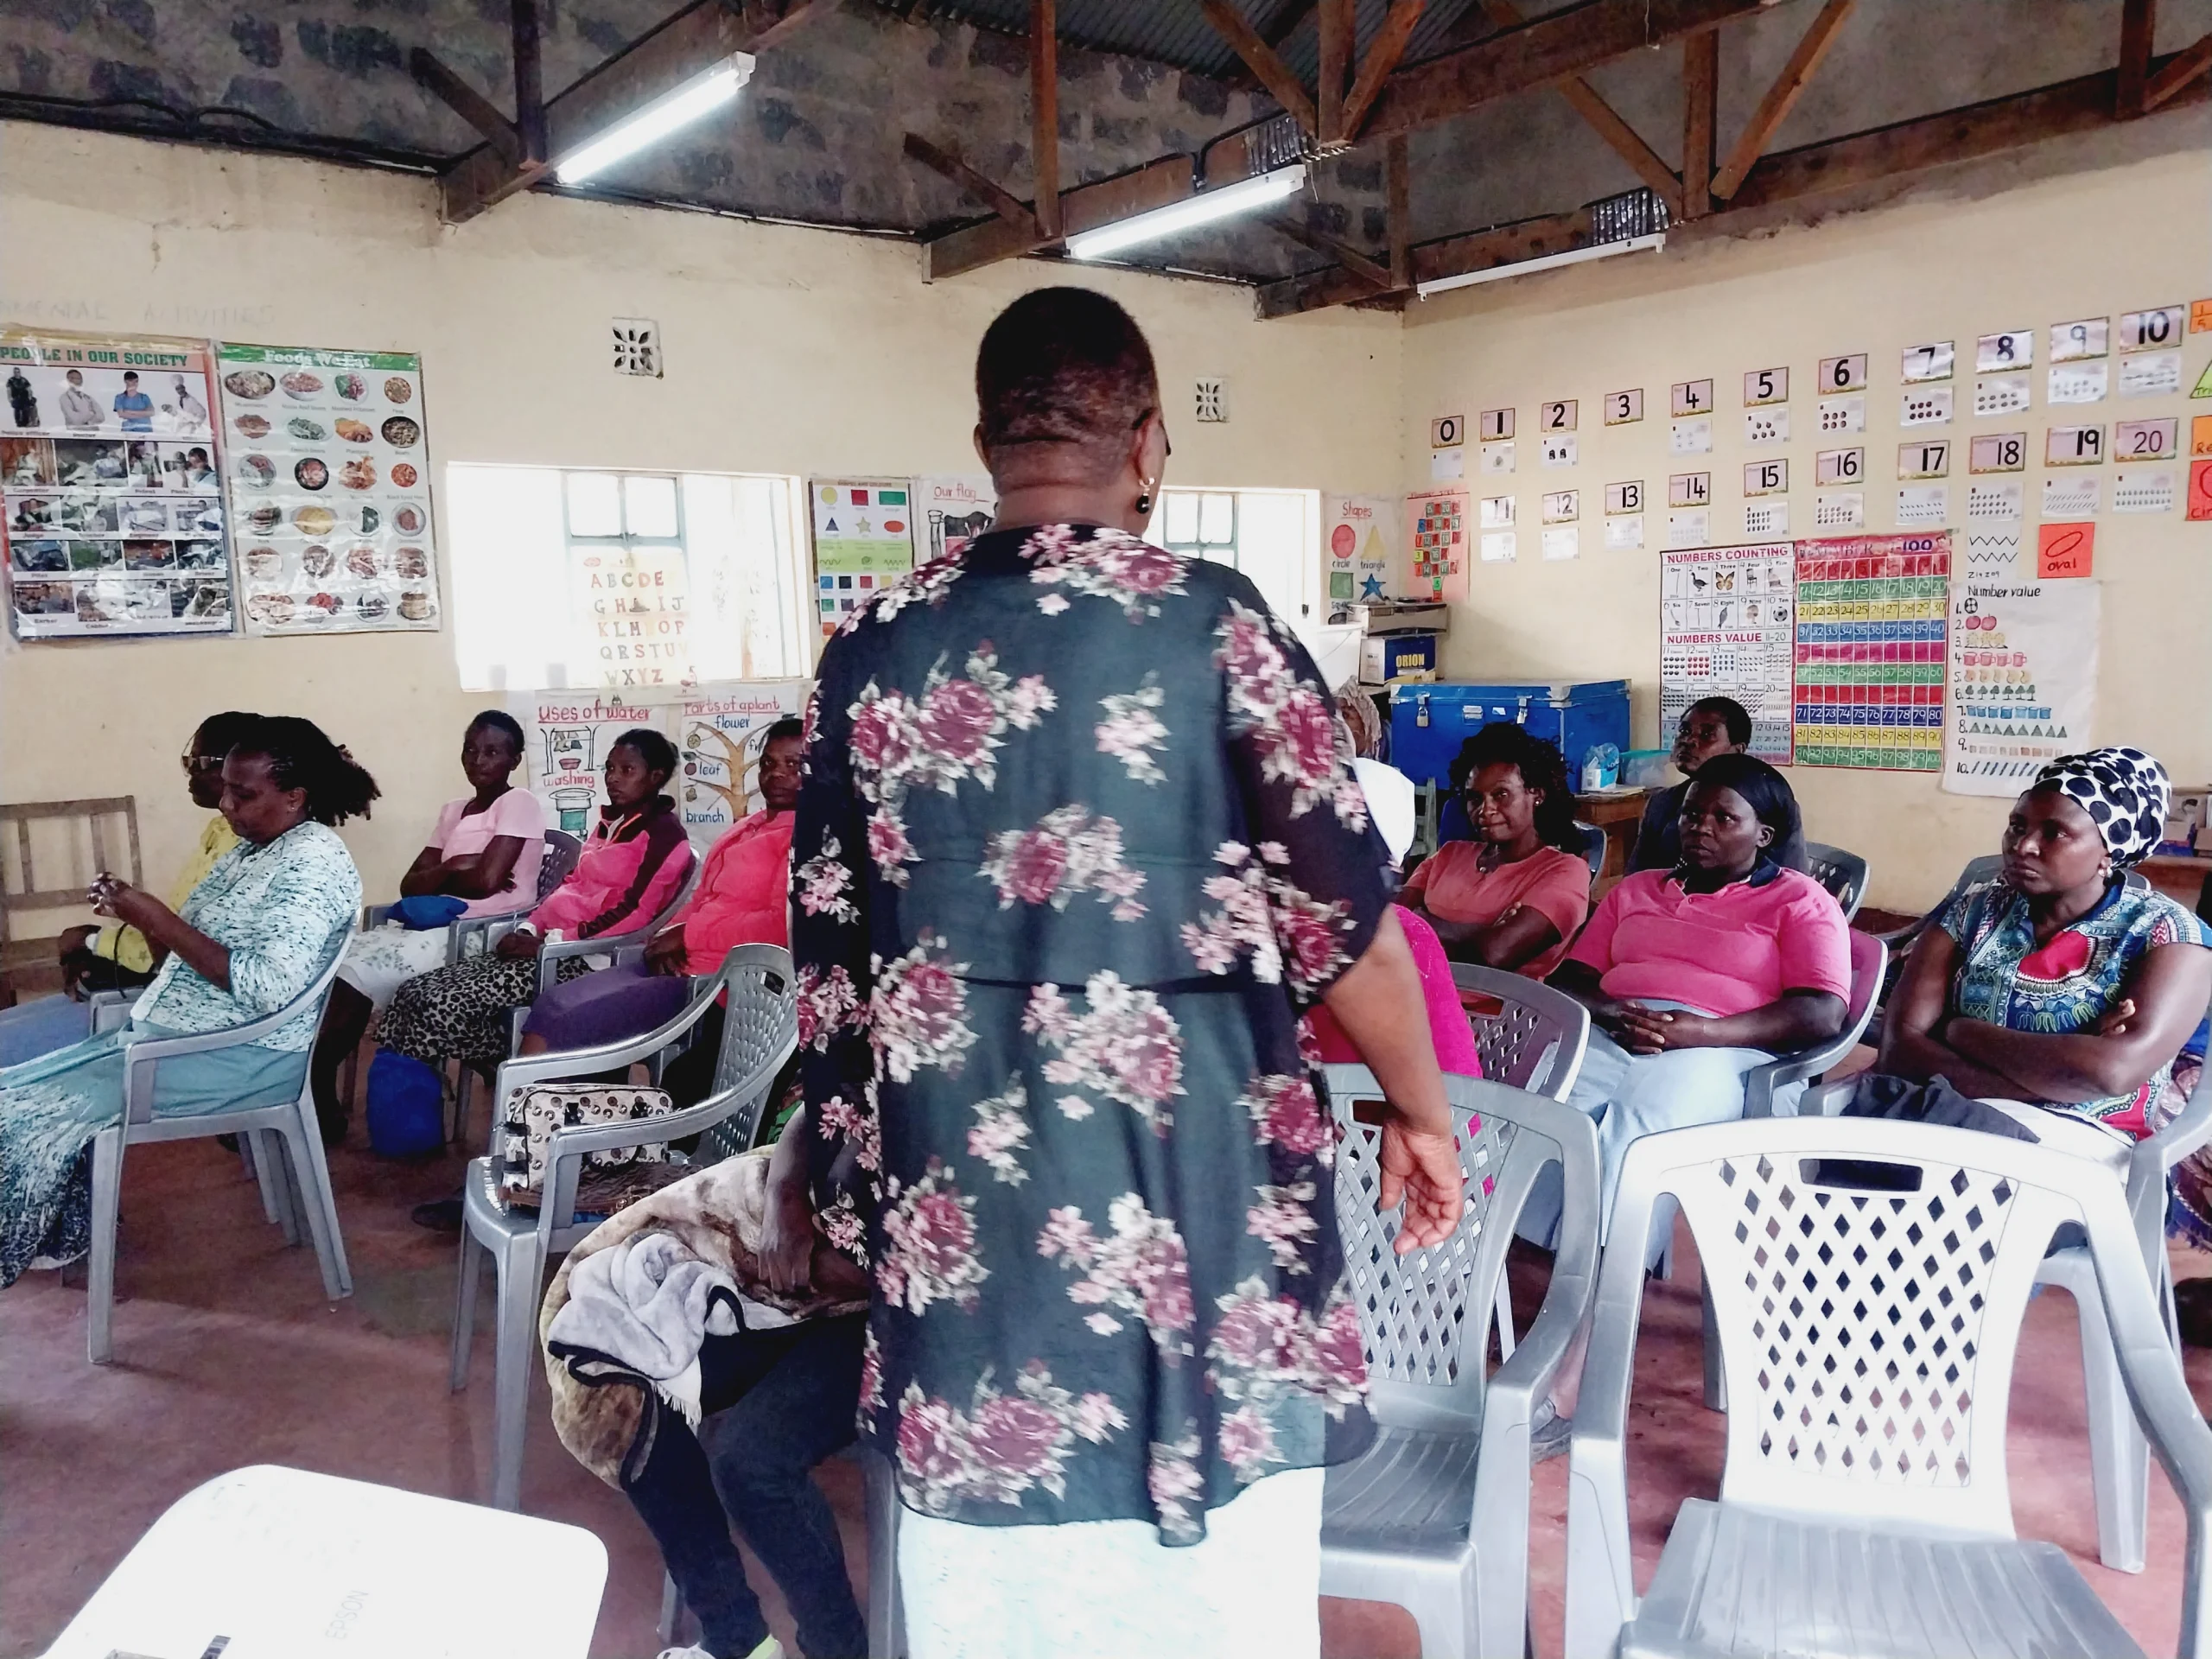 Dr Margaret, counselling psychologist, taking caregivers through some of the possible causes of their children's disability. This session was aimed at demystifying the myths around disability.